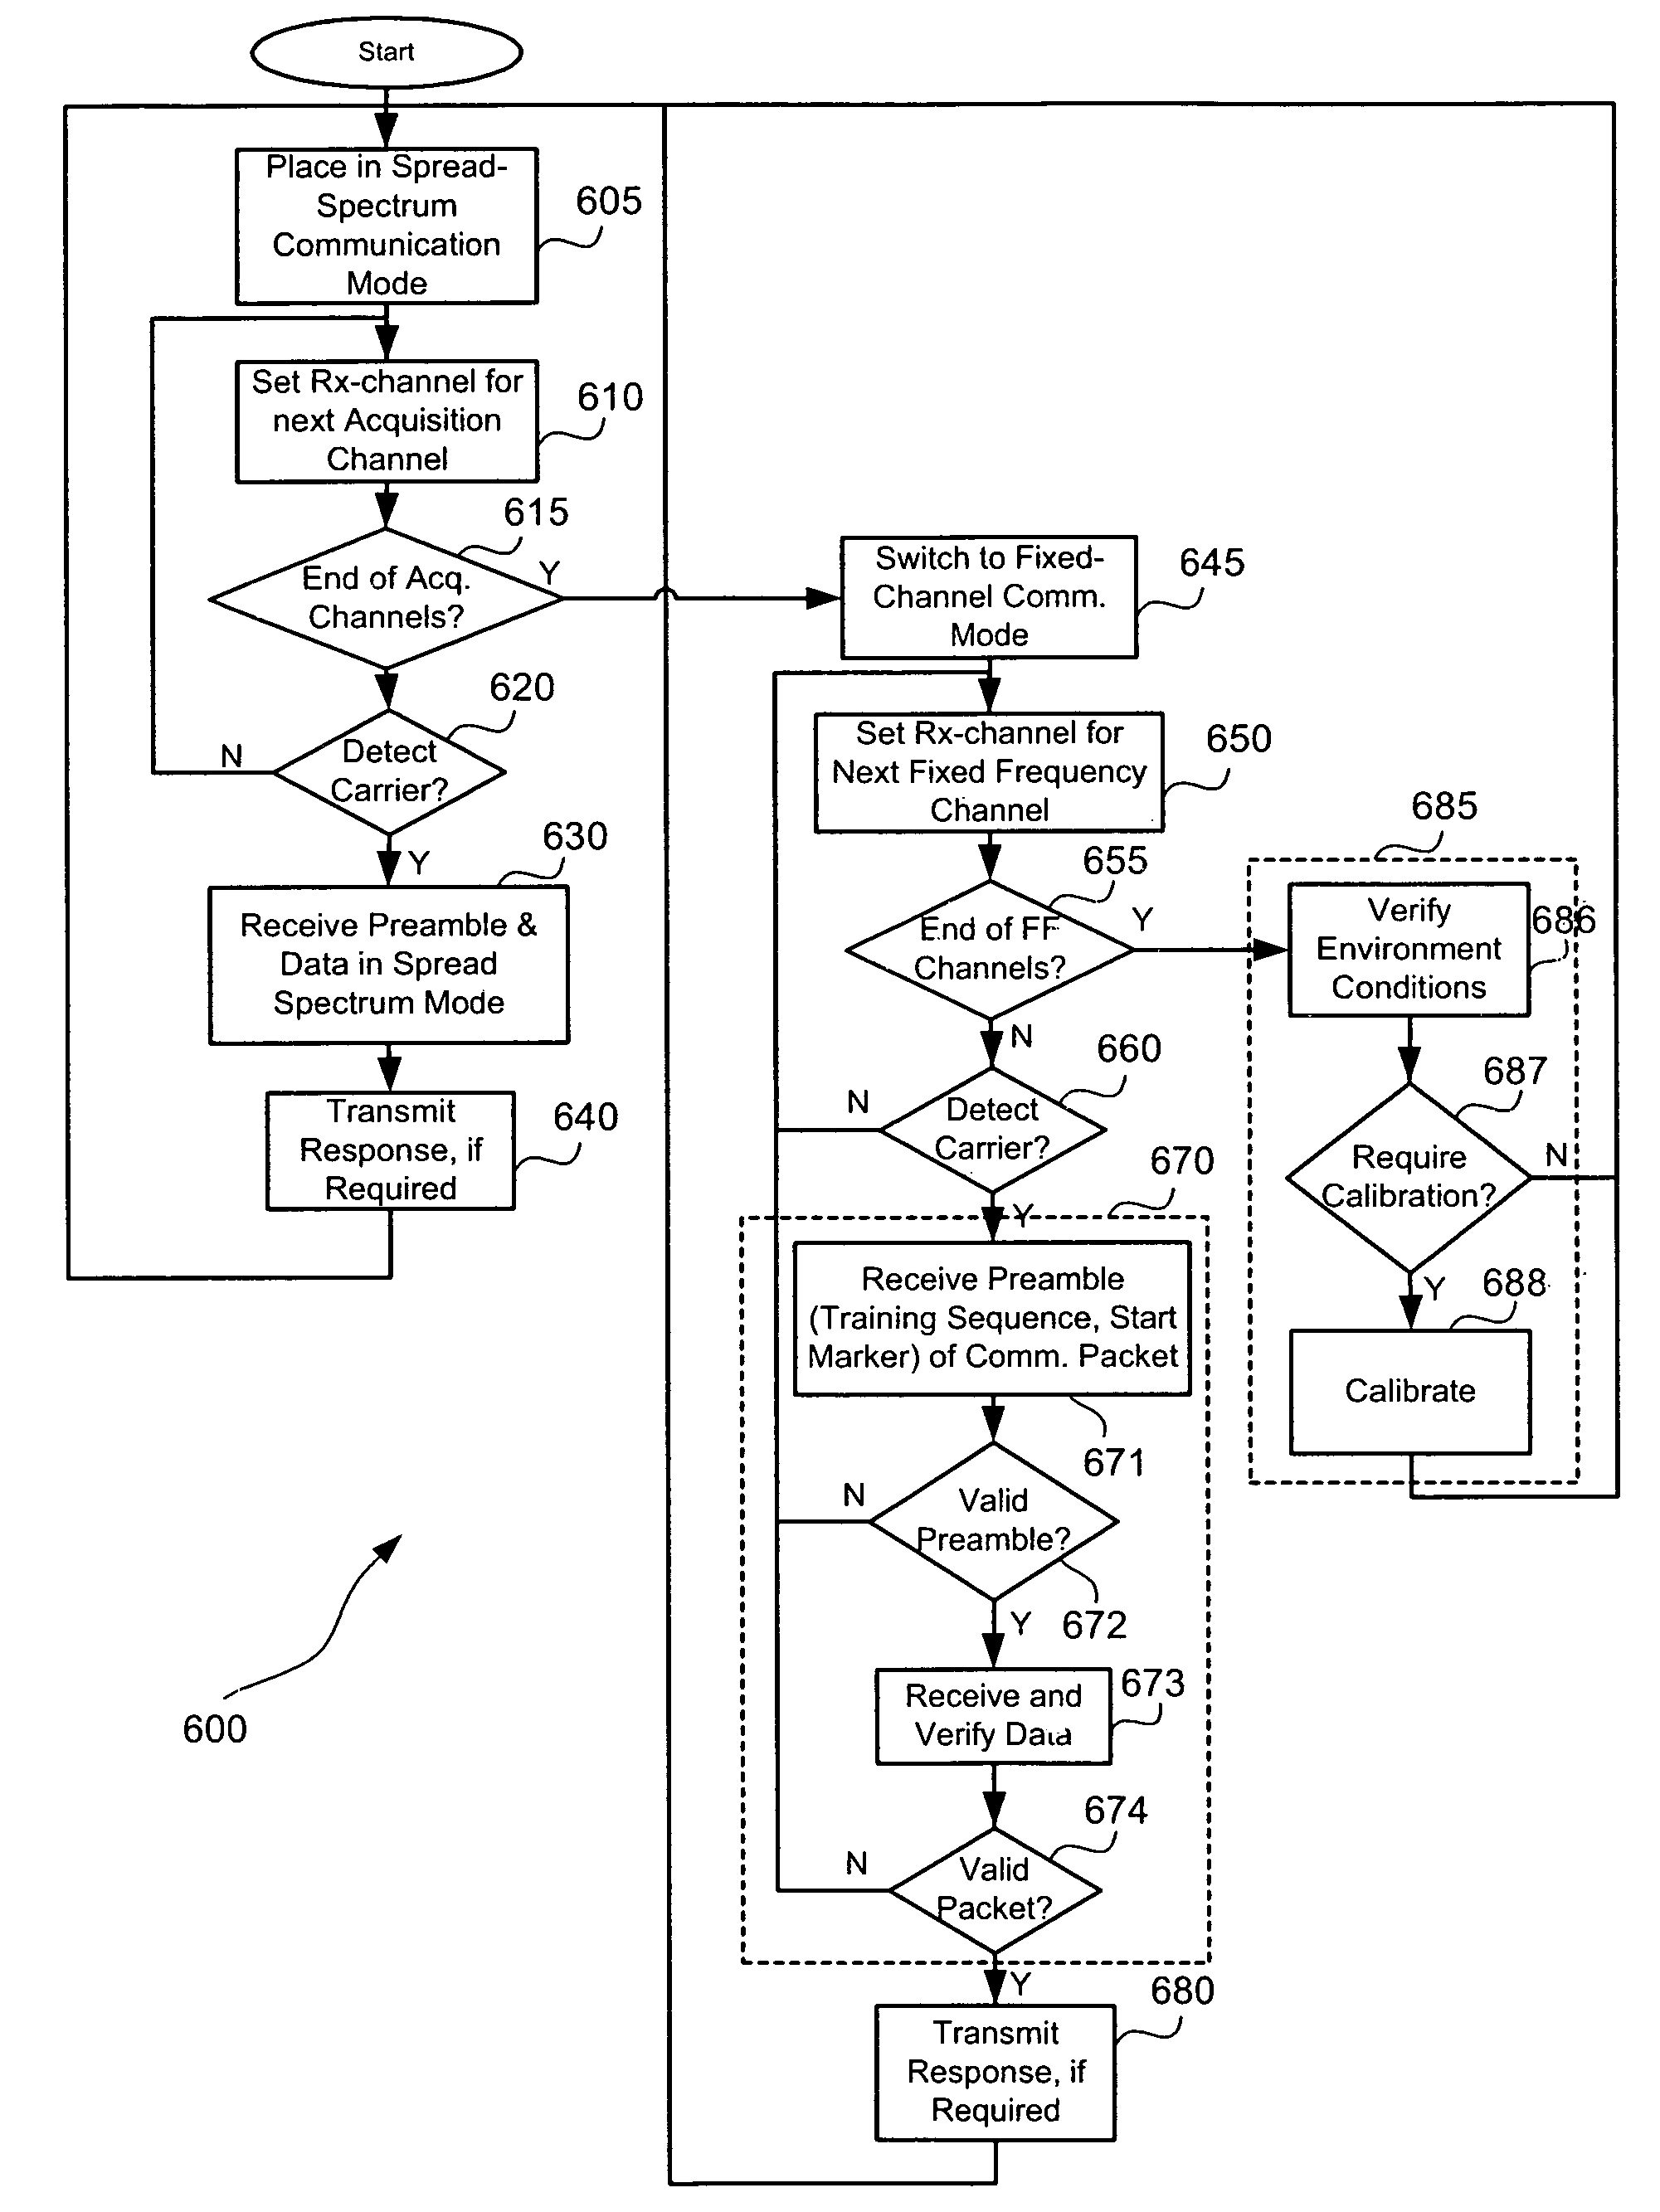 Method for communicating in dual-modes